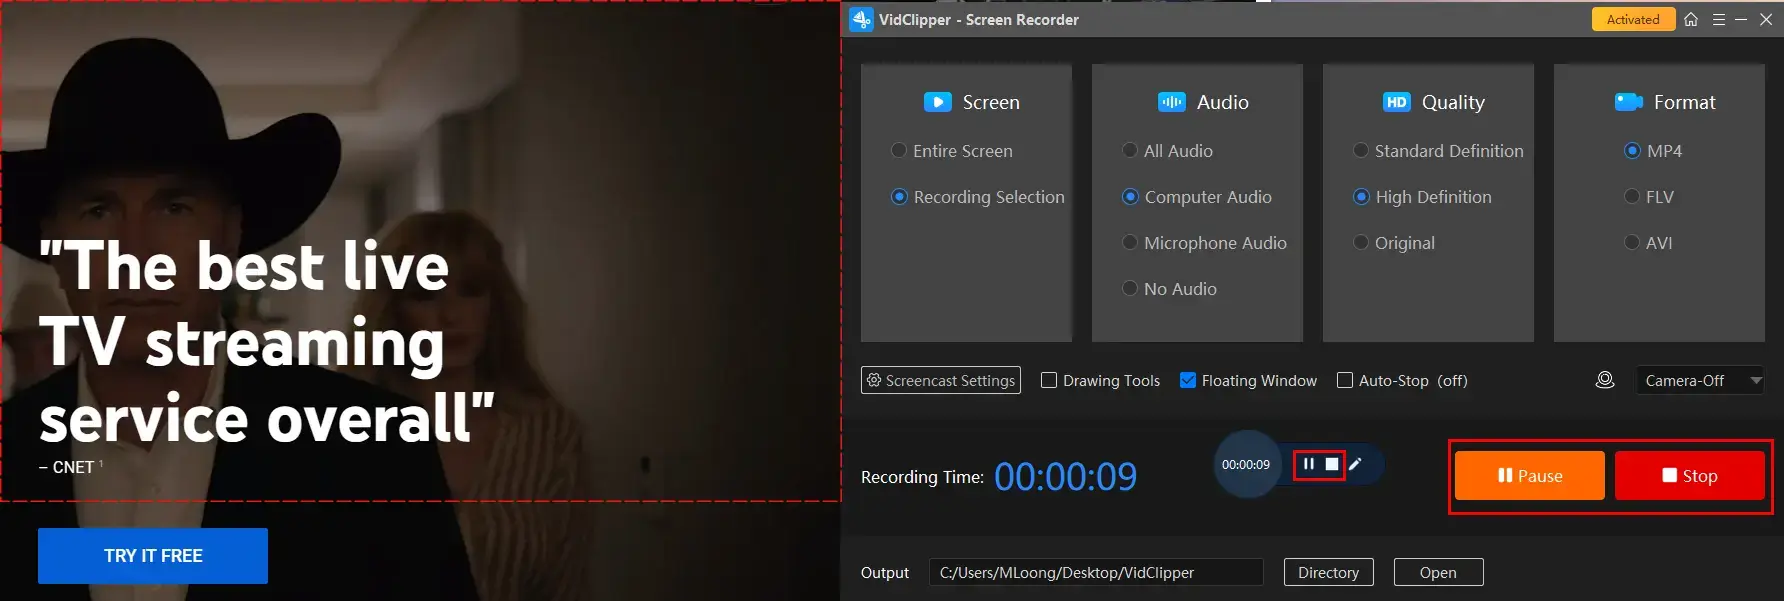 how to screen record protected videos on windows using workintool capture screen recorder